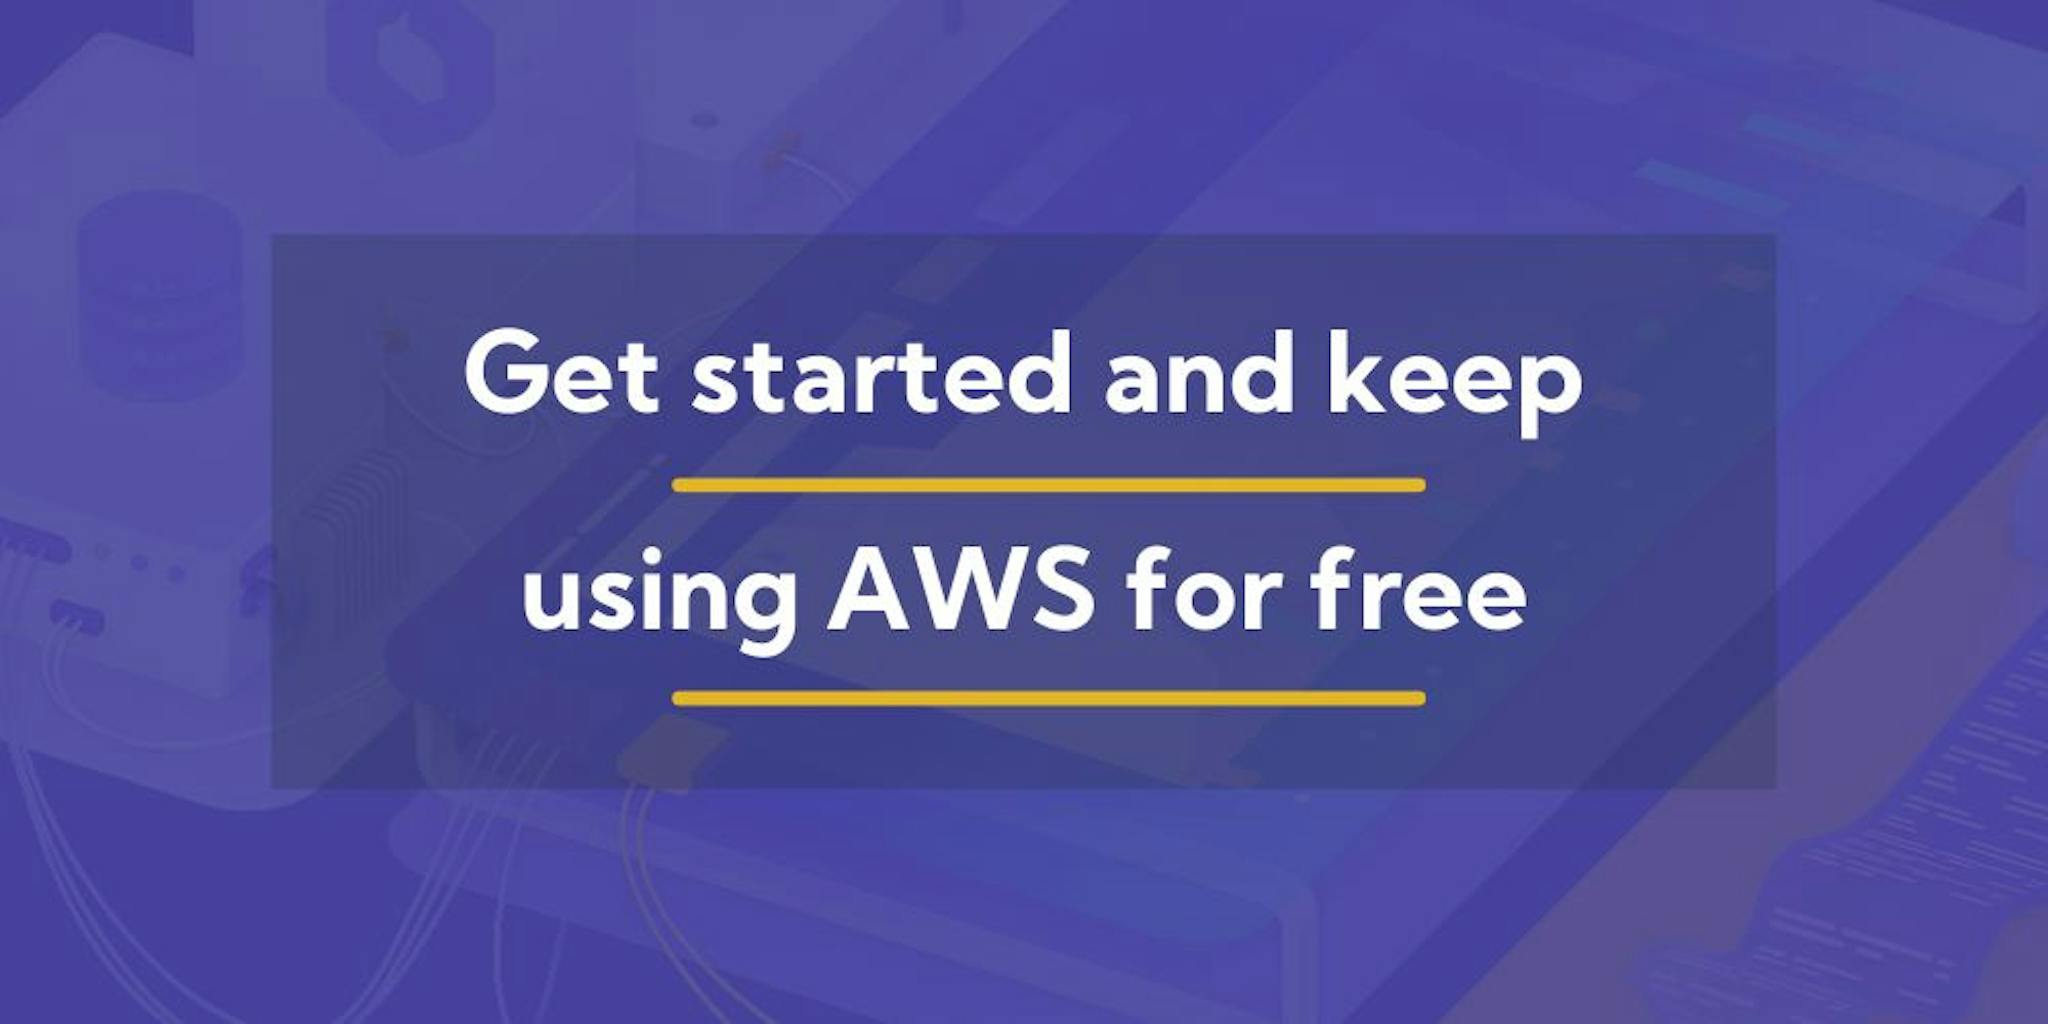 featured image - Resources and Tools by AWS That Can Help You Get Started for Free